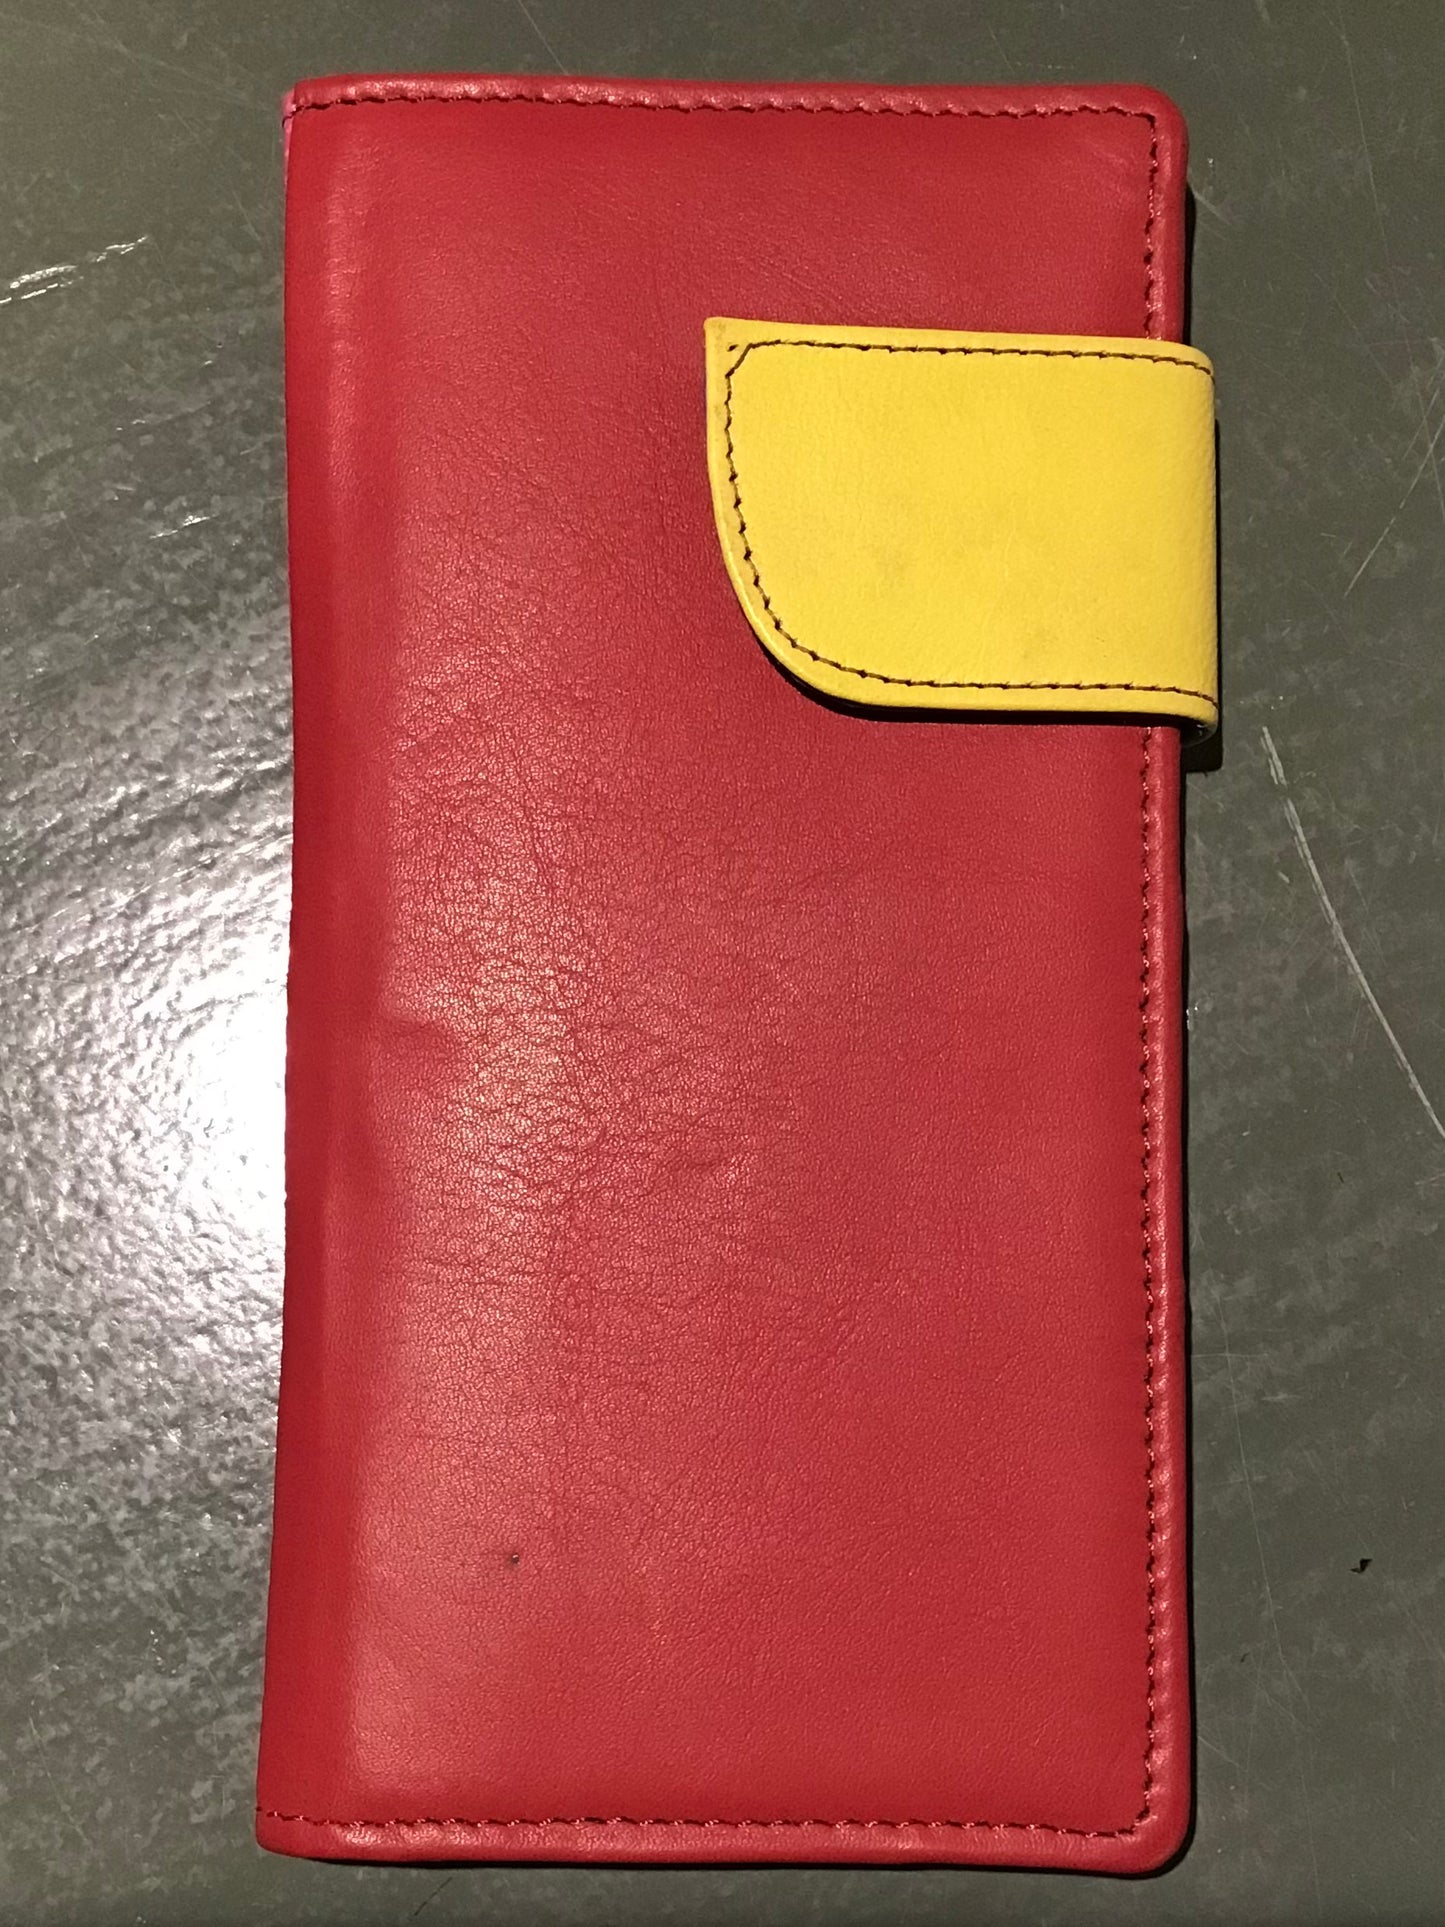 Recycled leather clutch purse